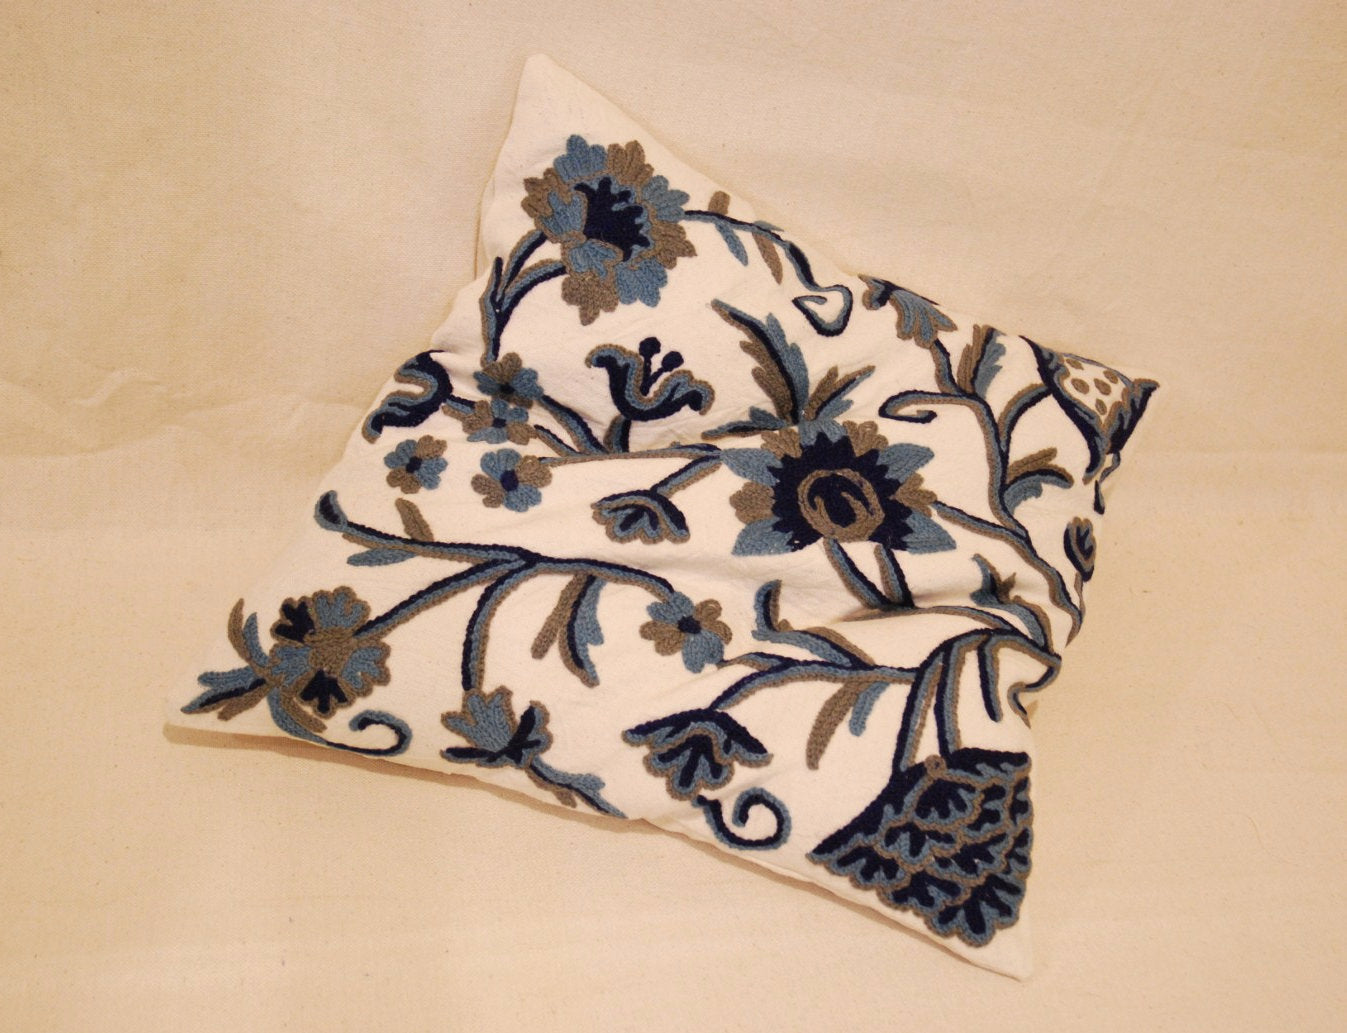 Cotton Crewel work Throw Pillow Cushion Cover "Tree of Life" Blue on White #CW402